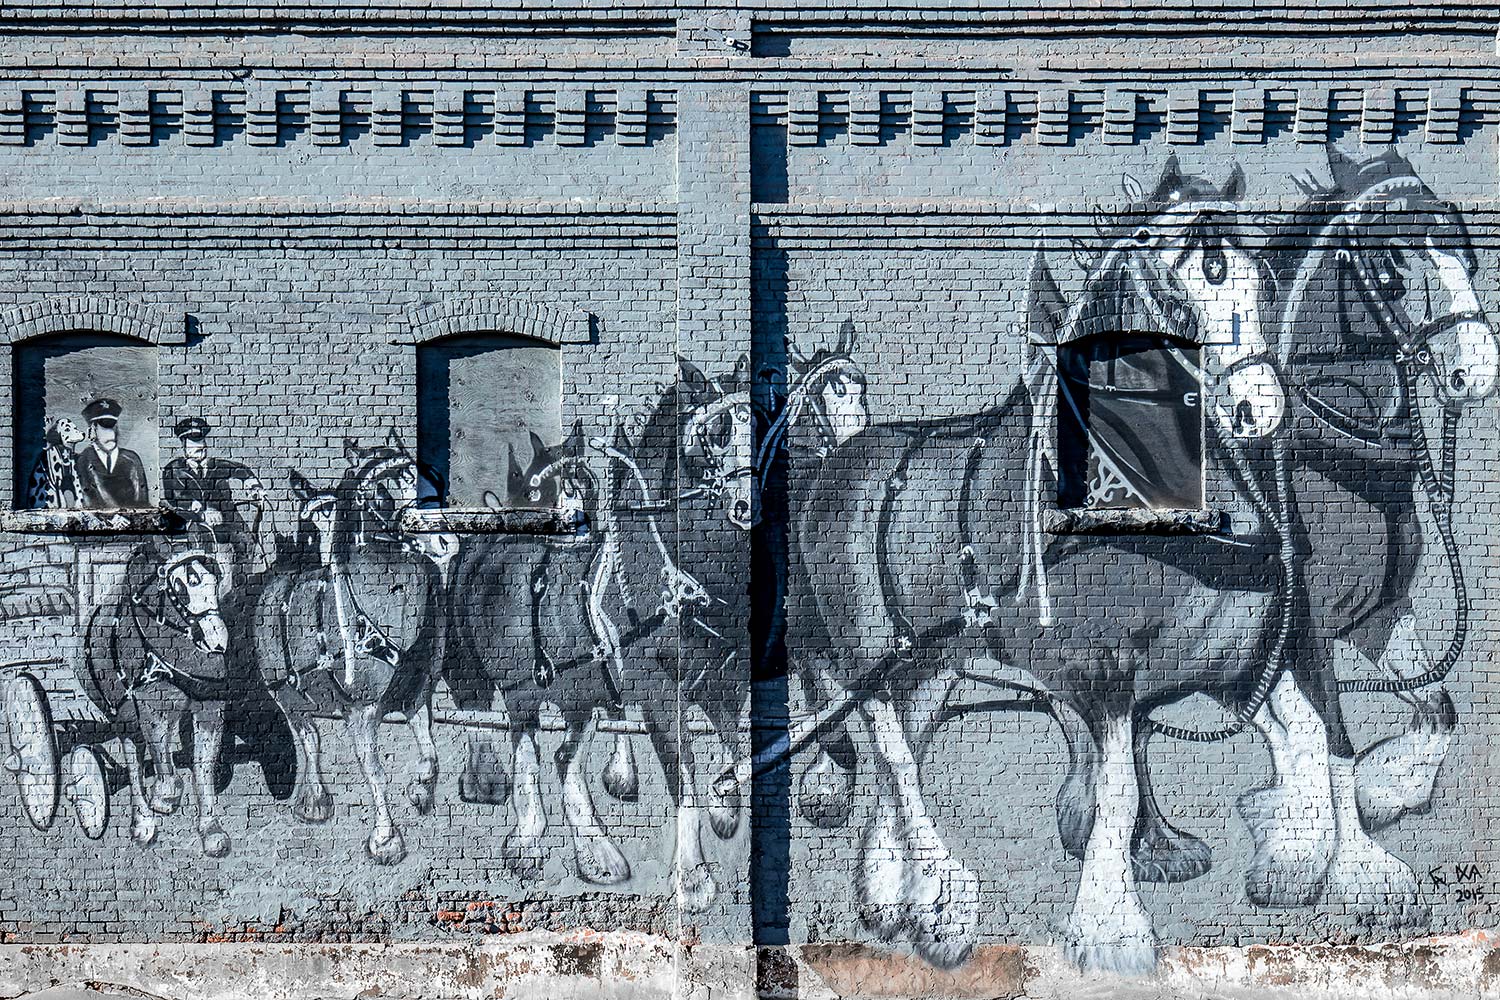 Clydesdale Mural